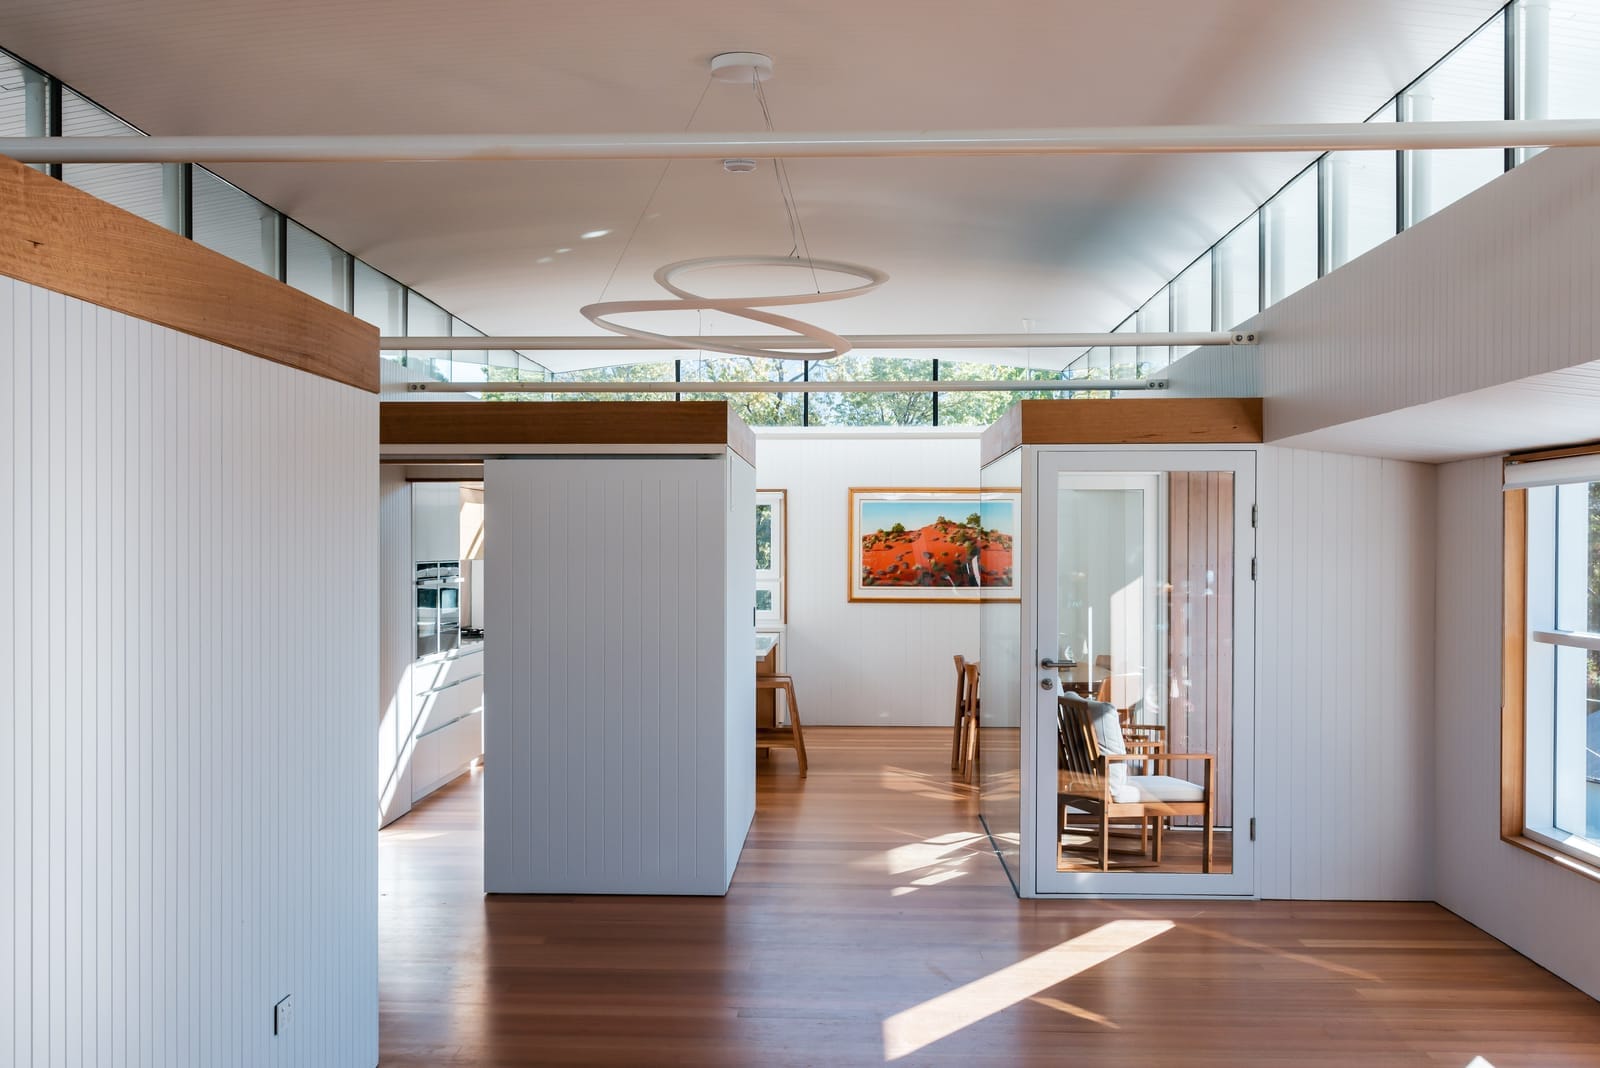 Wattle Bird House by Flett Architecture. Photography by Matt Sansom. Open plan kitchen and dining room with polished timber floors and white clad timber walls. High ceilings with windows around perimeter. 